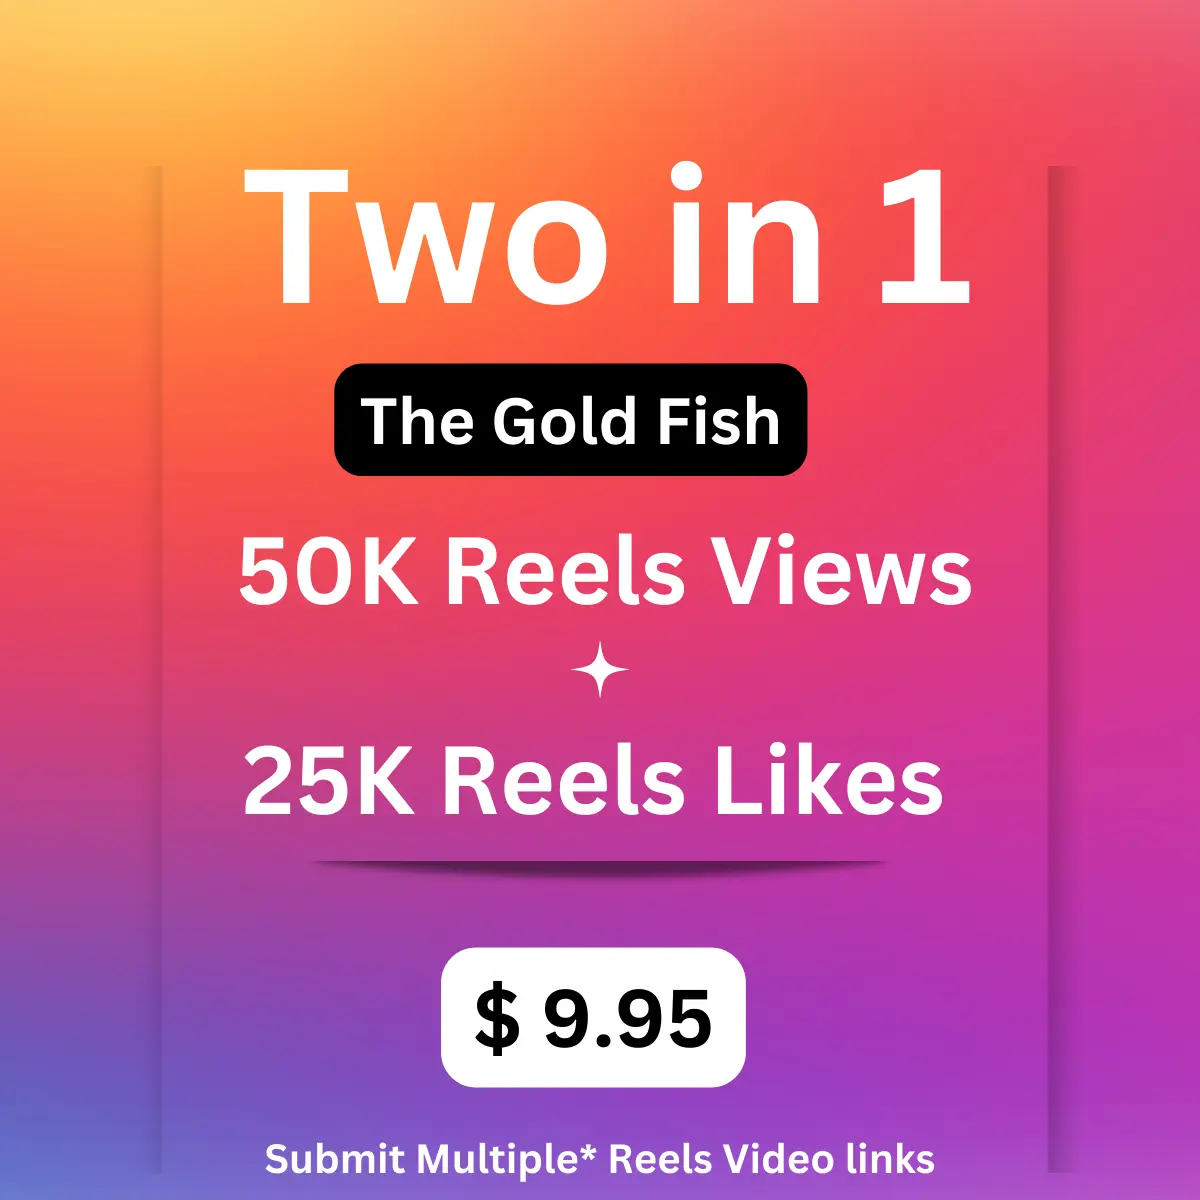 Two in 1 - The Gold Fish